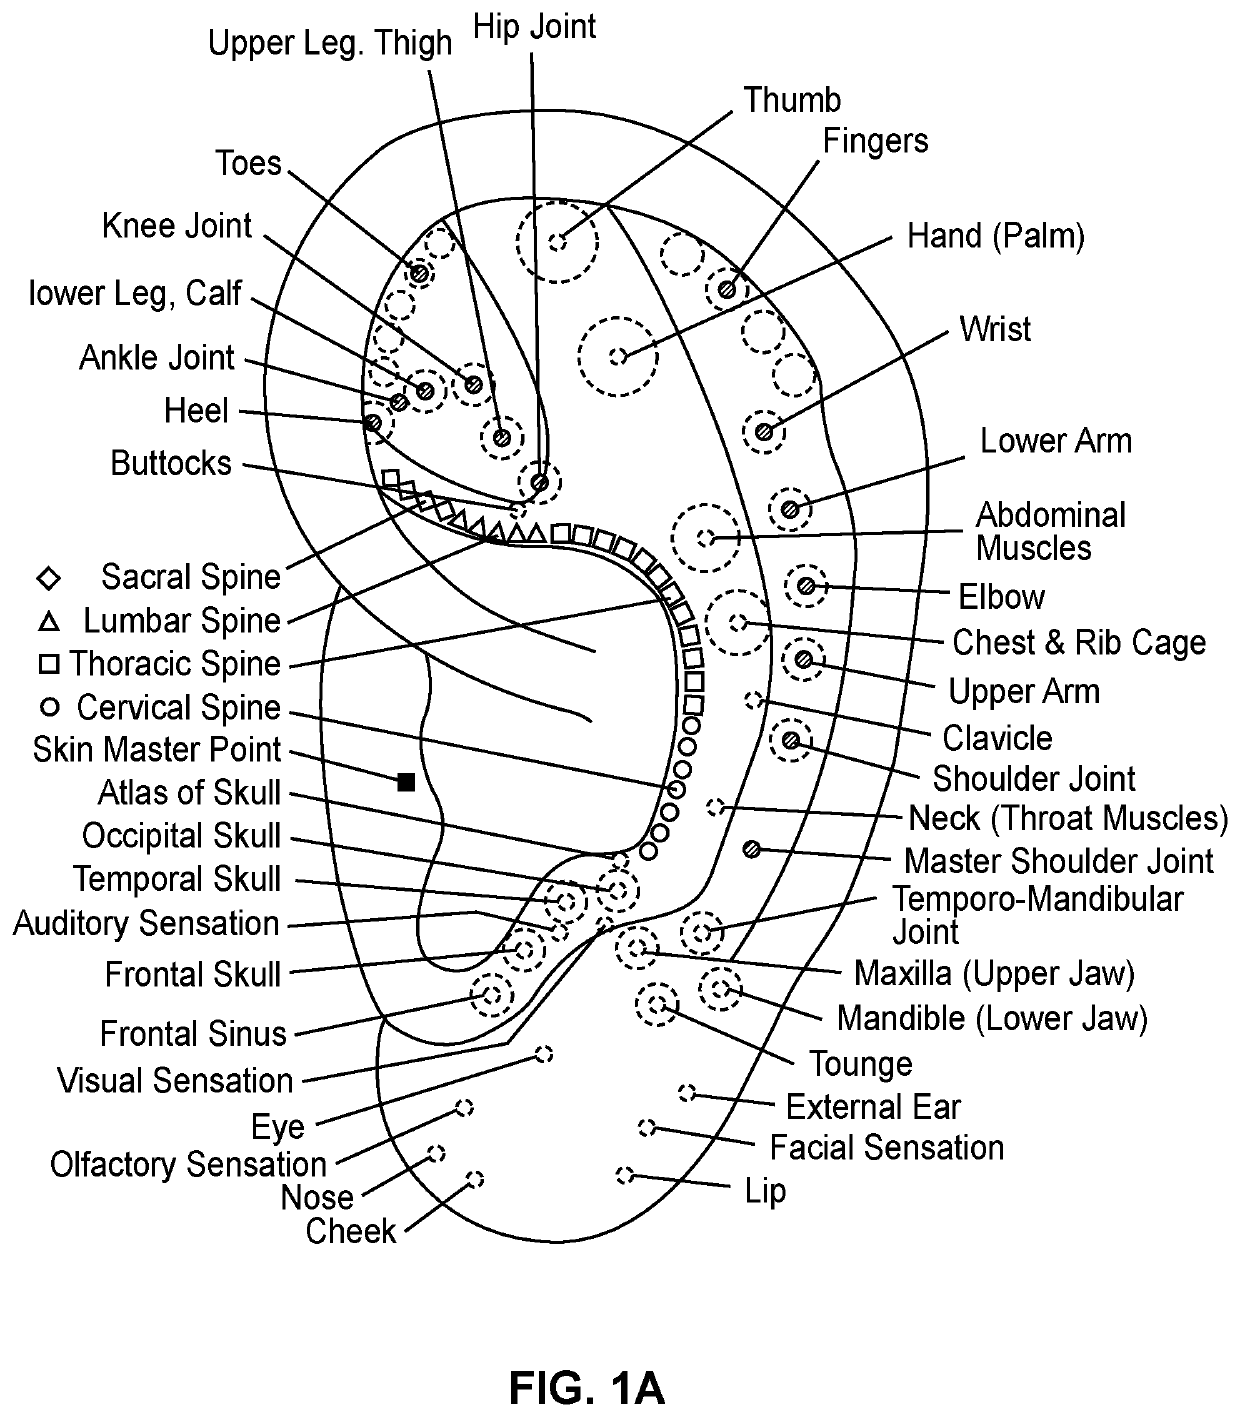 Devices, systems and methods for auricular acupuncture